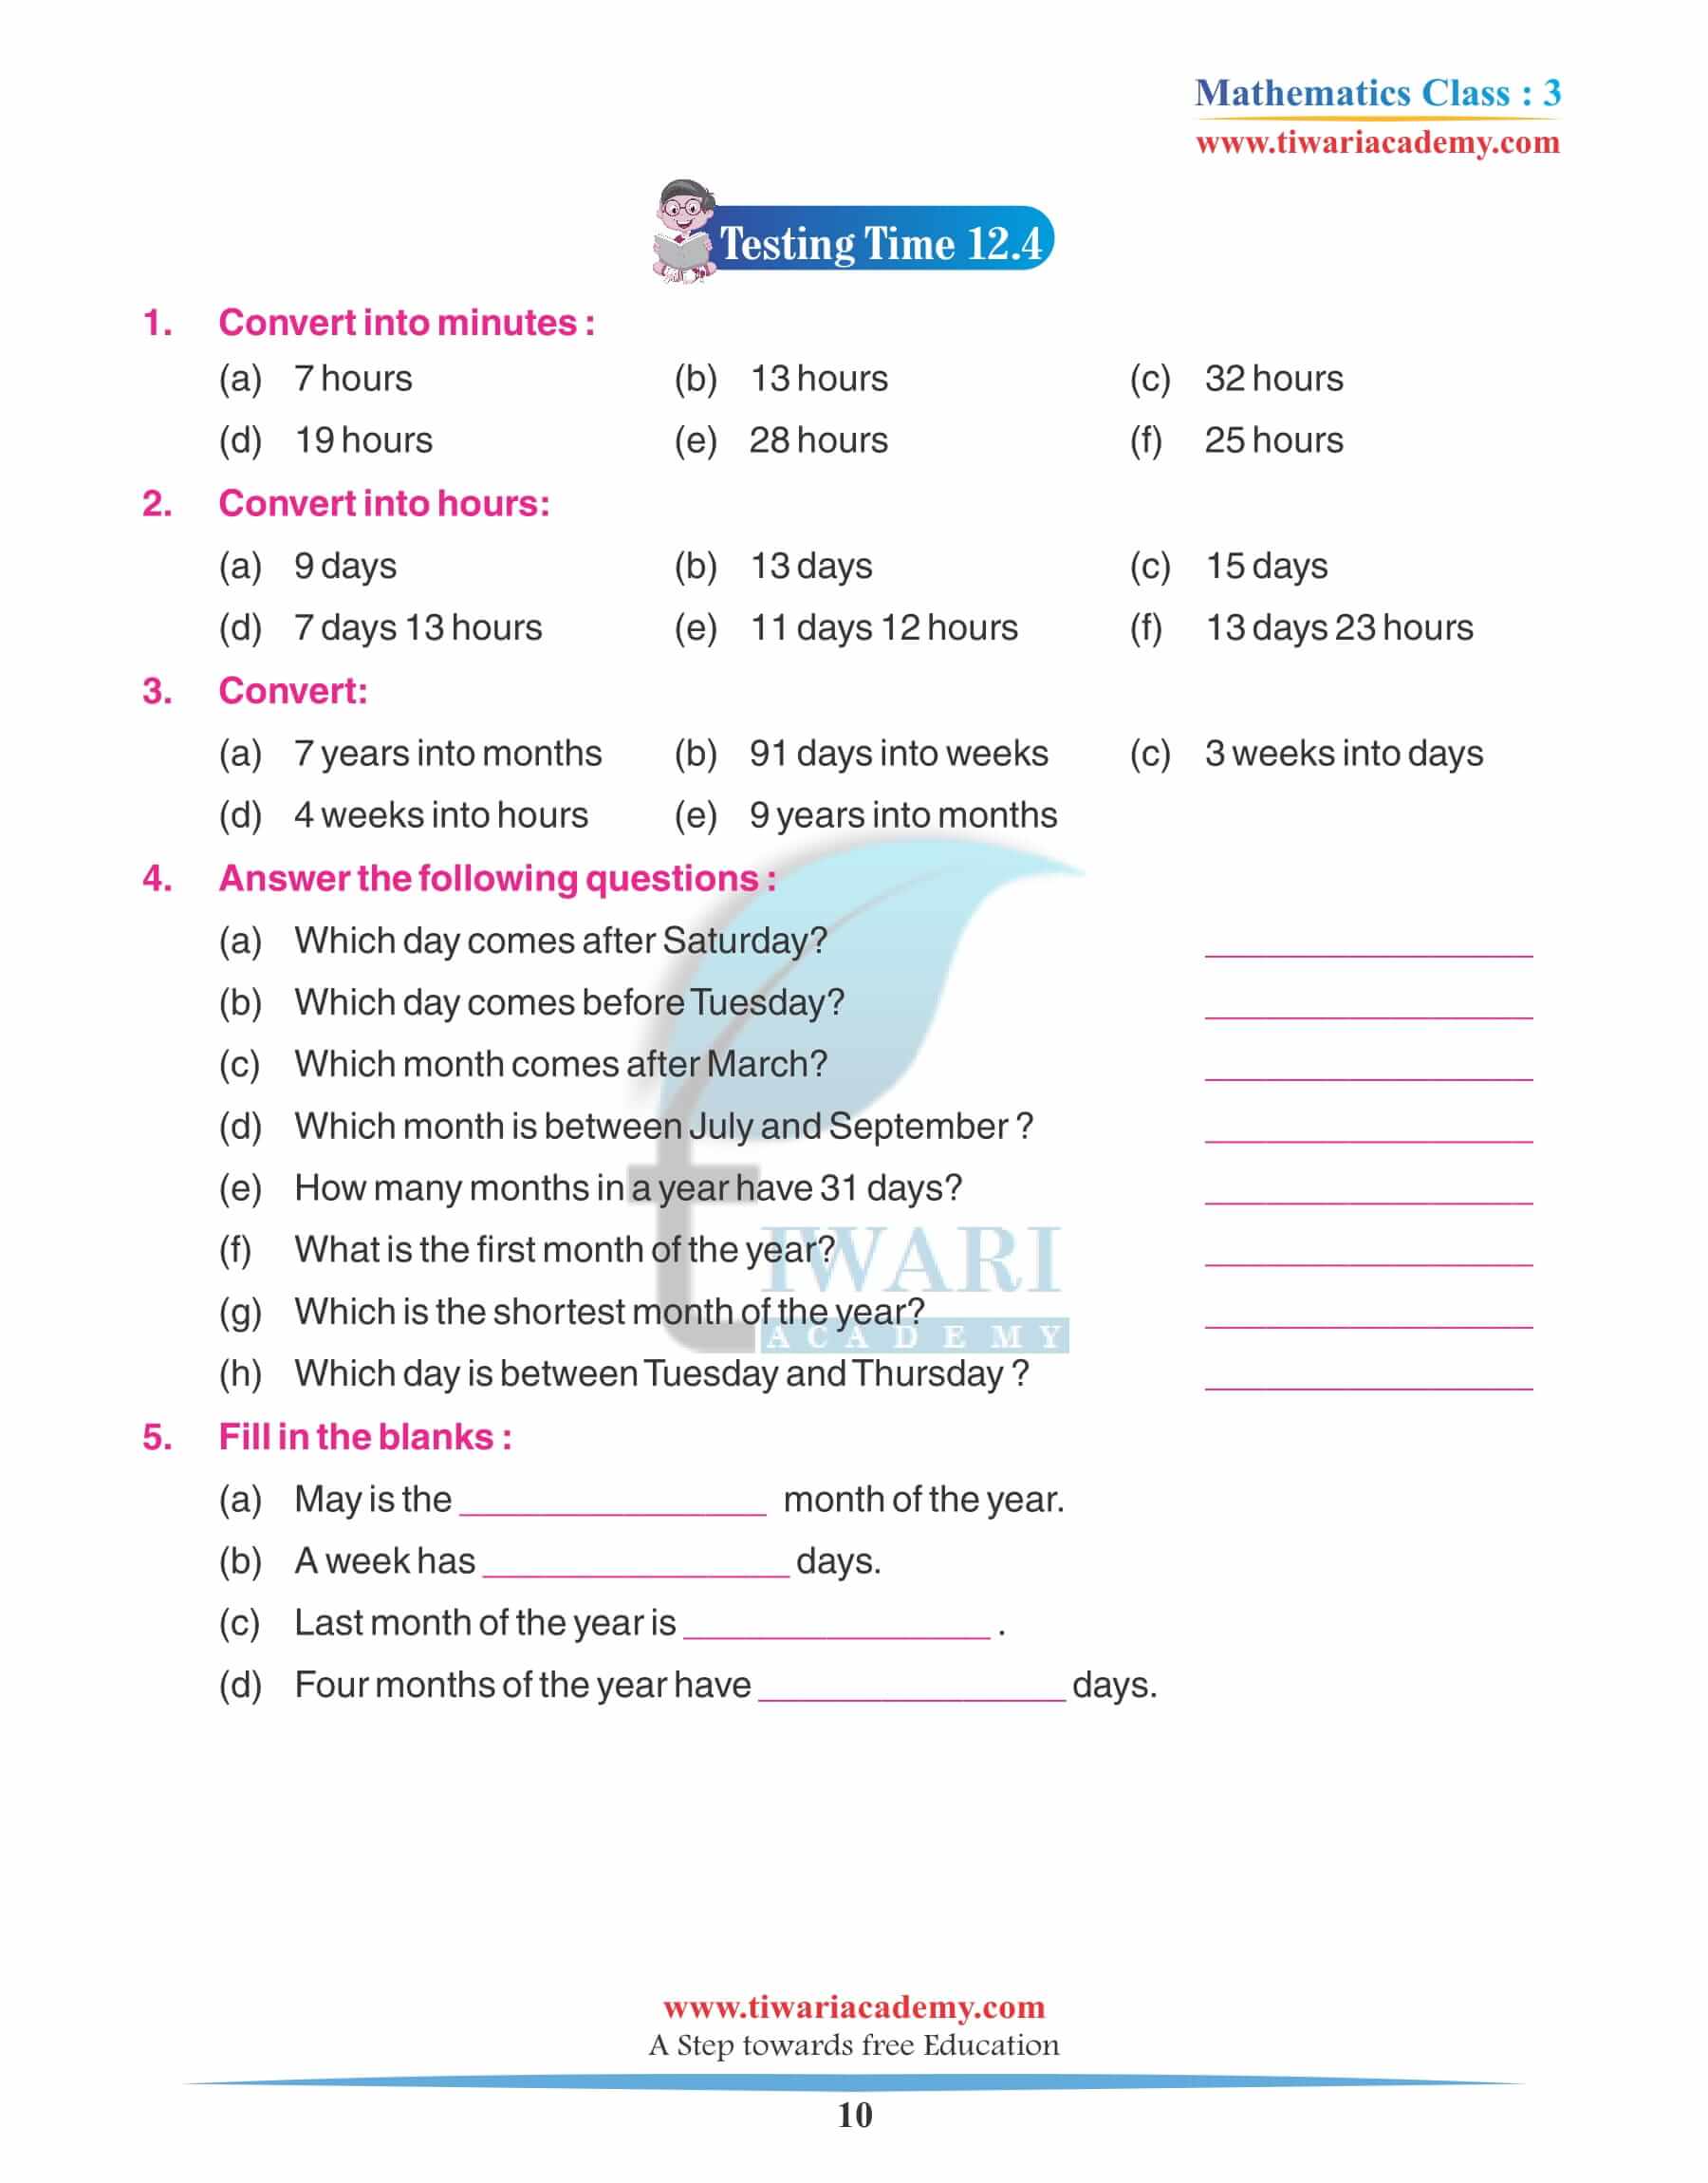 Class 3 Maths Chapter 12 Practice Fill in the Blanks